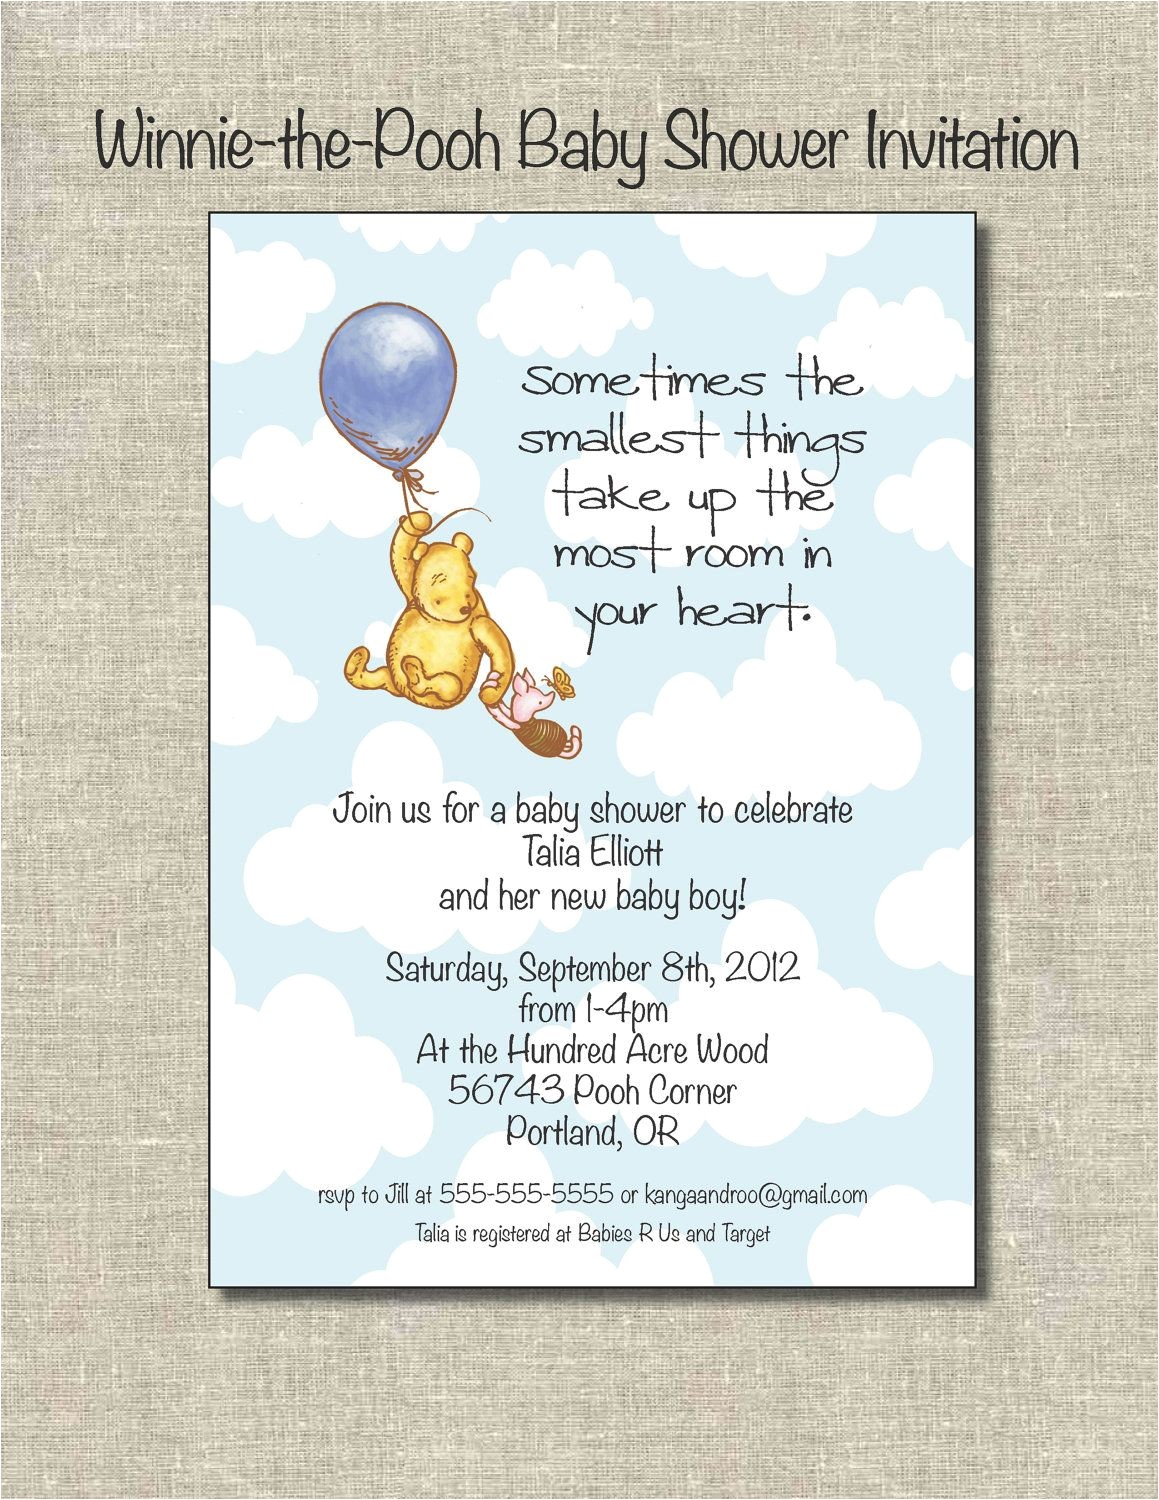 Classic Winnie the Pooh Baby Shower Invites Winnie the Pooh Baby Shower Ideas On Pinterest